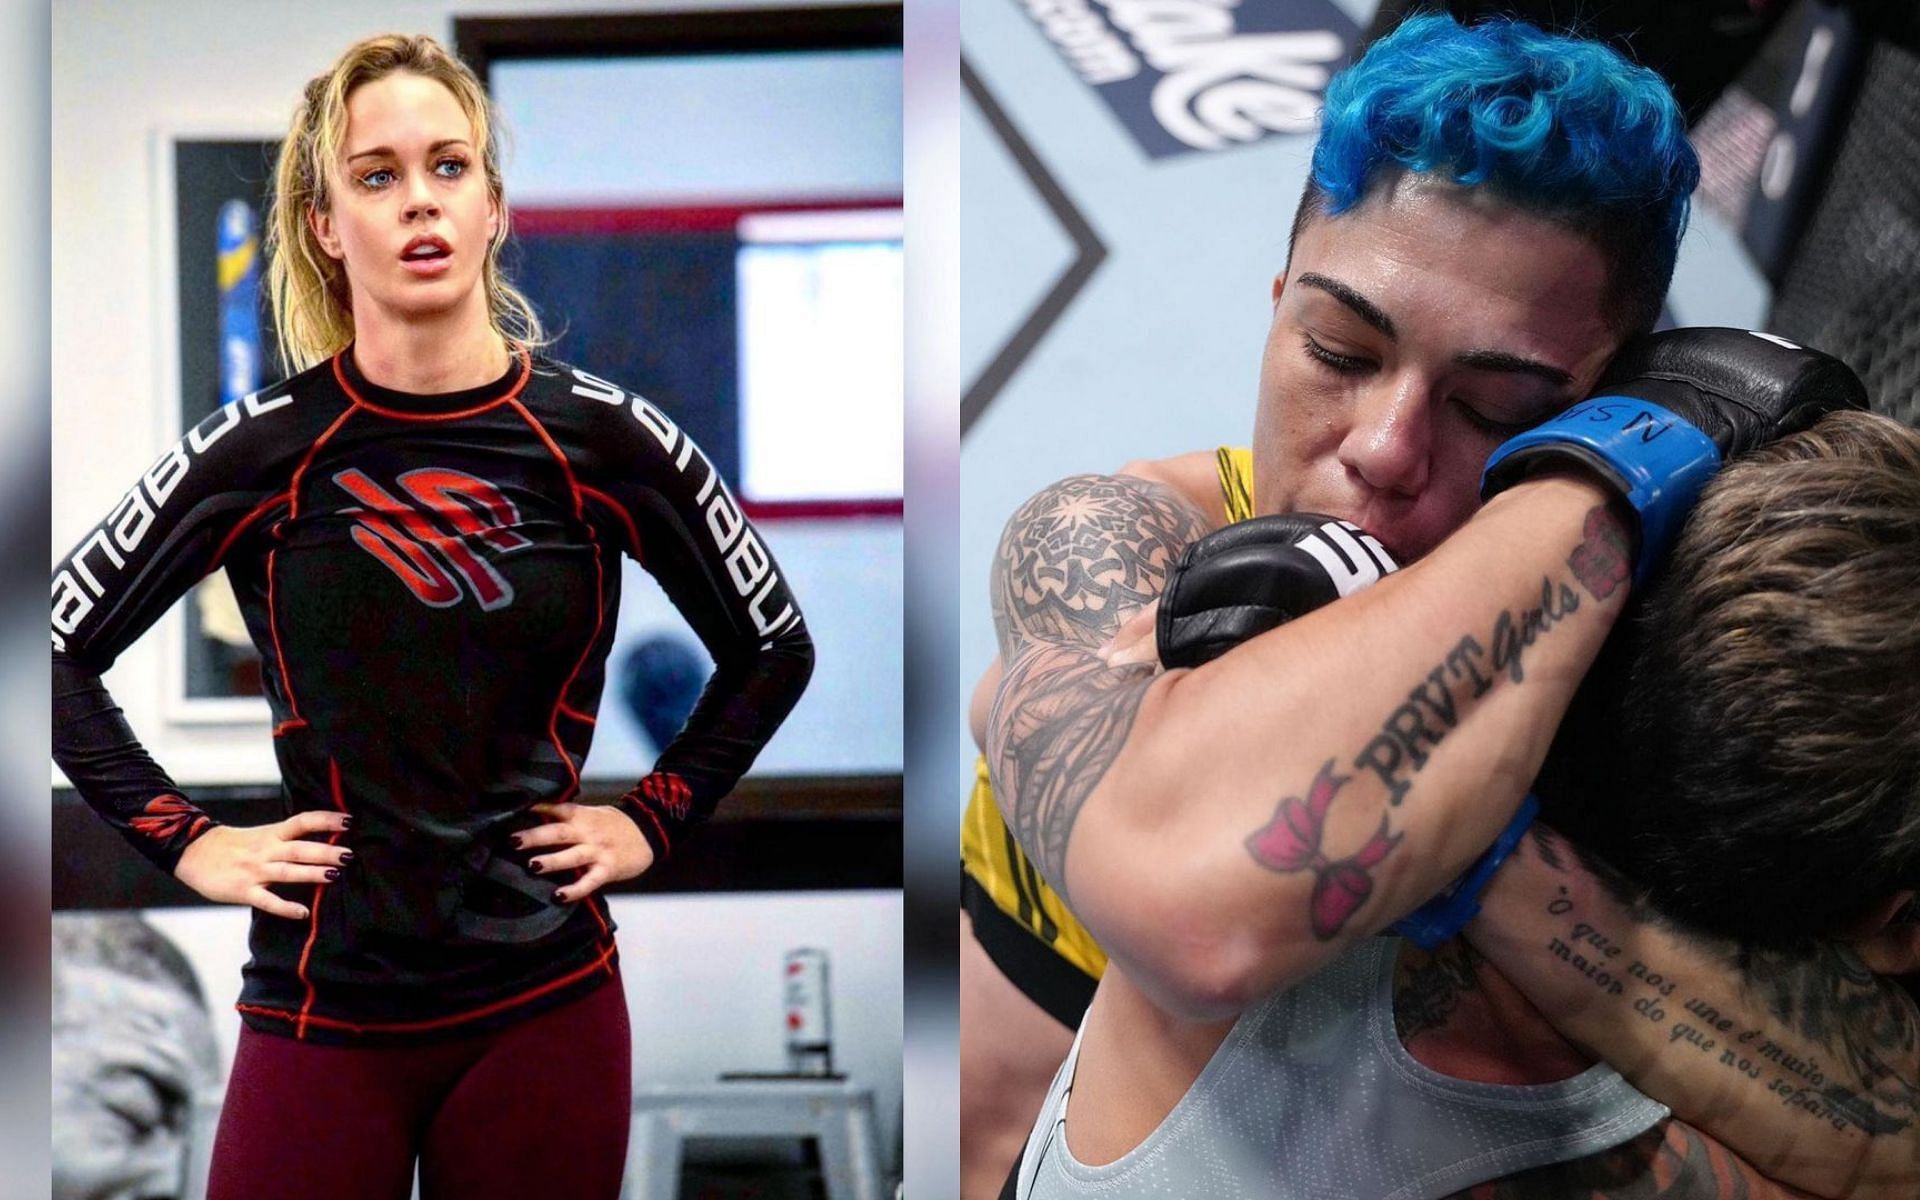 Laura Sanko (Left) and Jessica Andrade (Right) (Images courtesy of @jessicammapro Instagram and @laura_sanko Instagram)